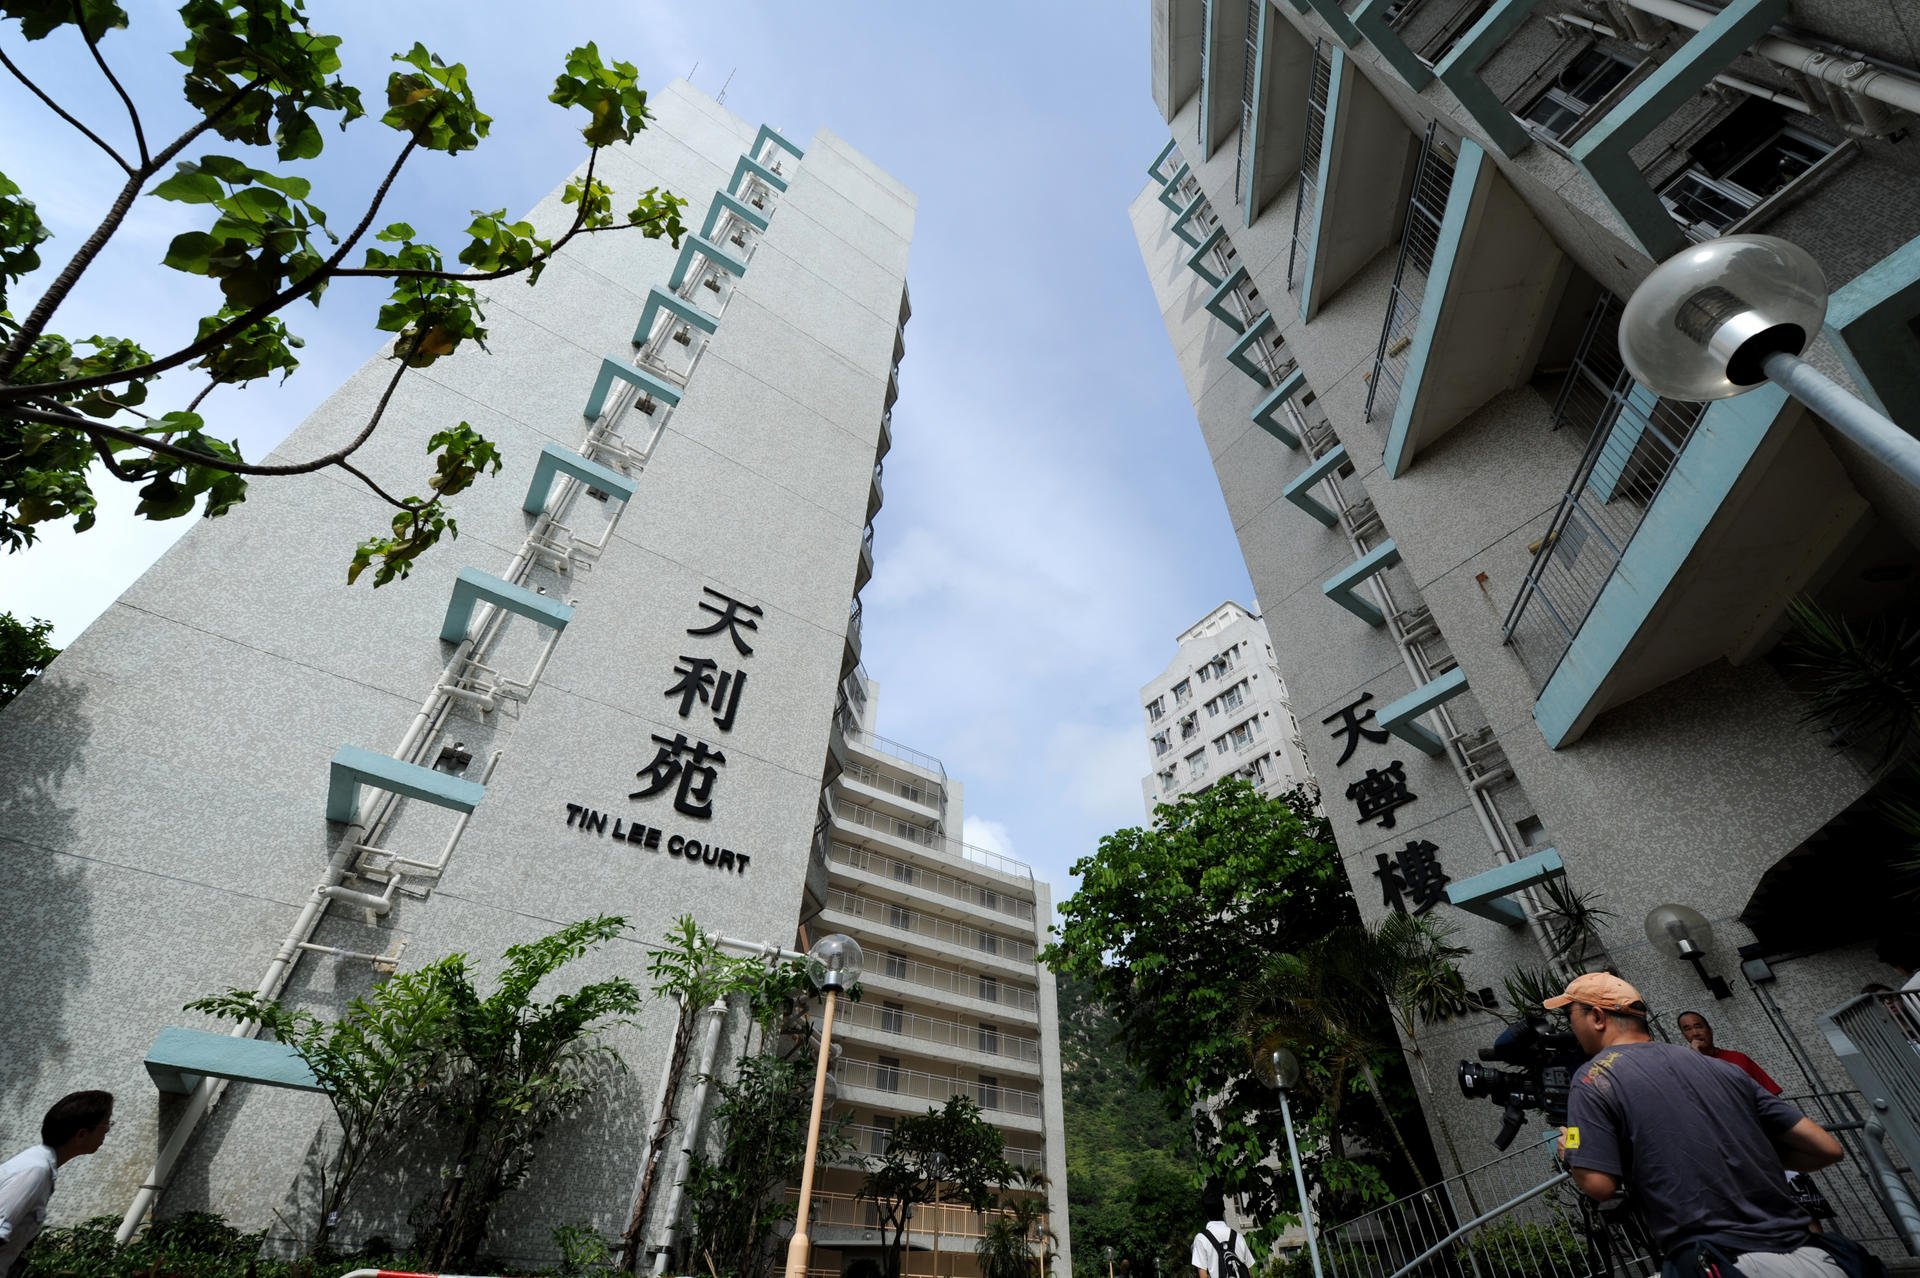 Some 369 HOS flats at Tin Chung Court were remortgaged.